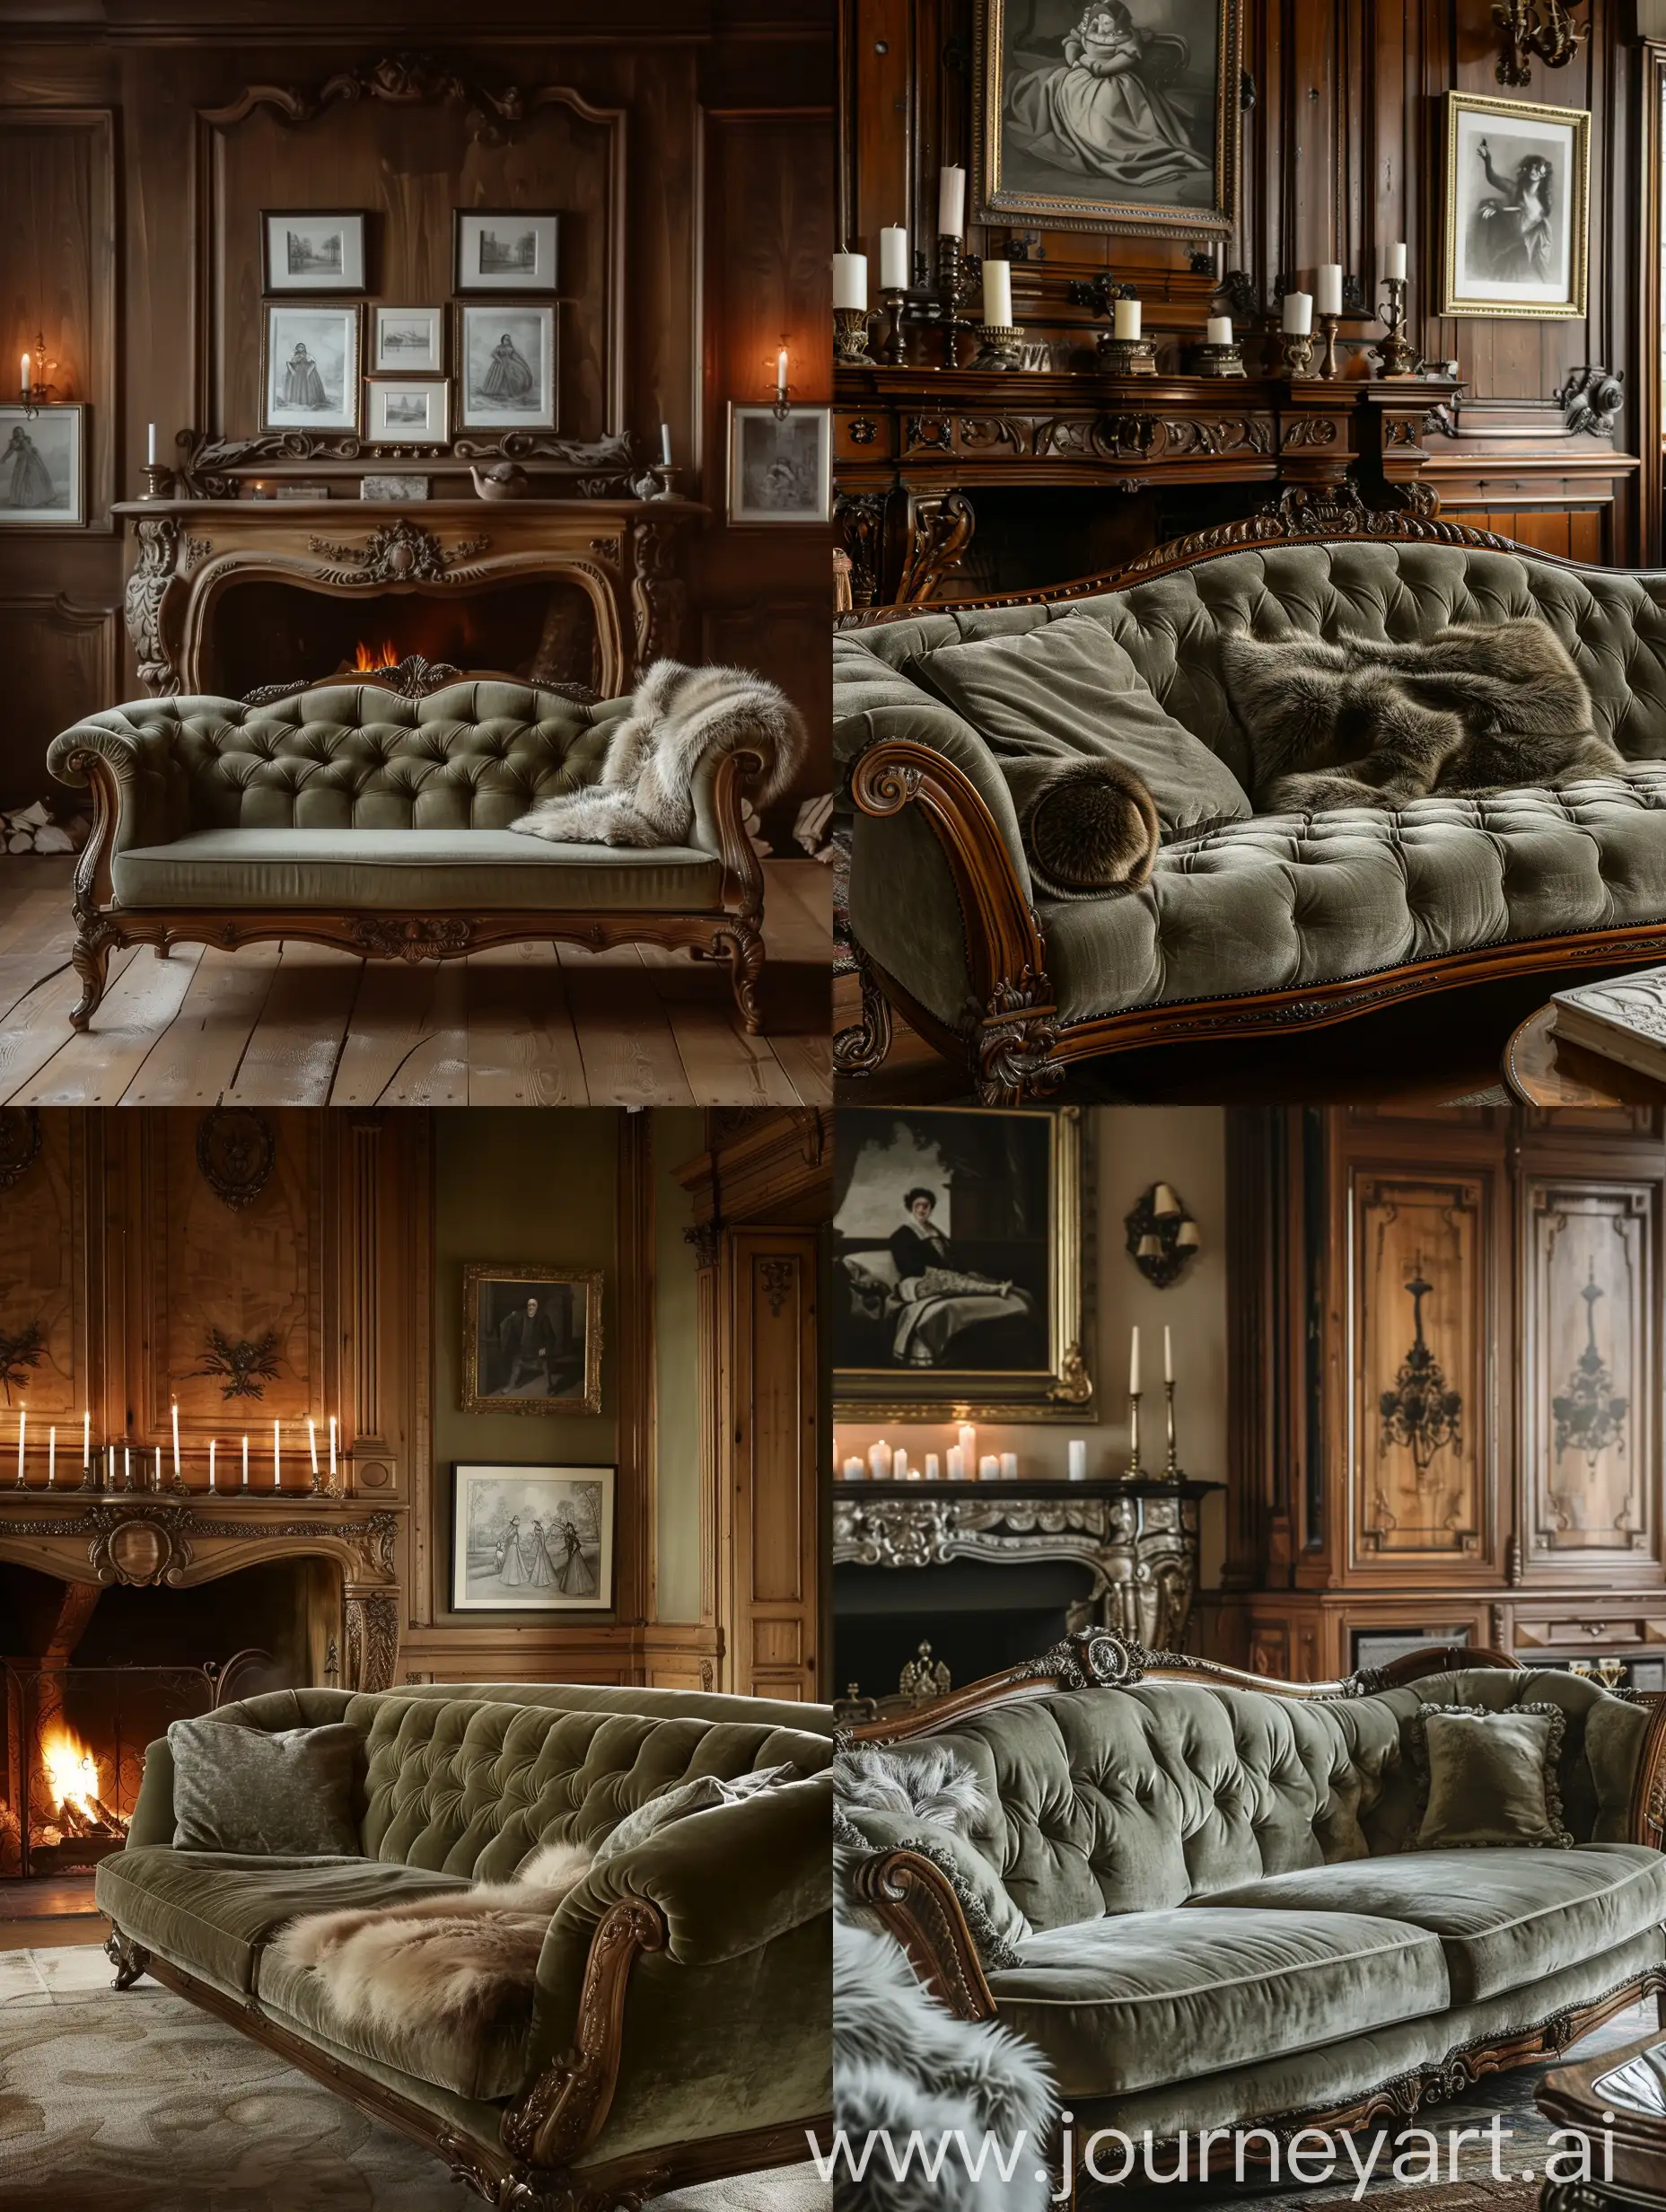 Vintage-Russian-Estate-Interior-with-Empire-Style-Sofa-and-Charcoal-Drawings